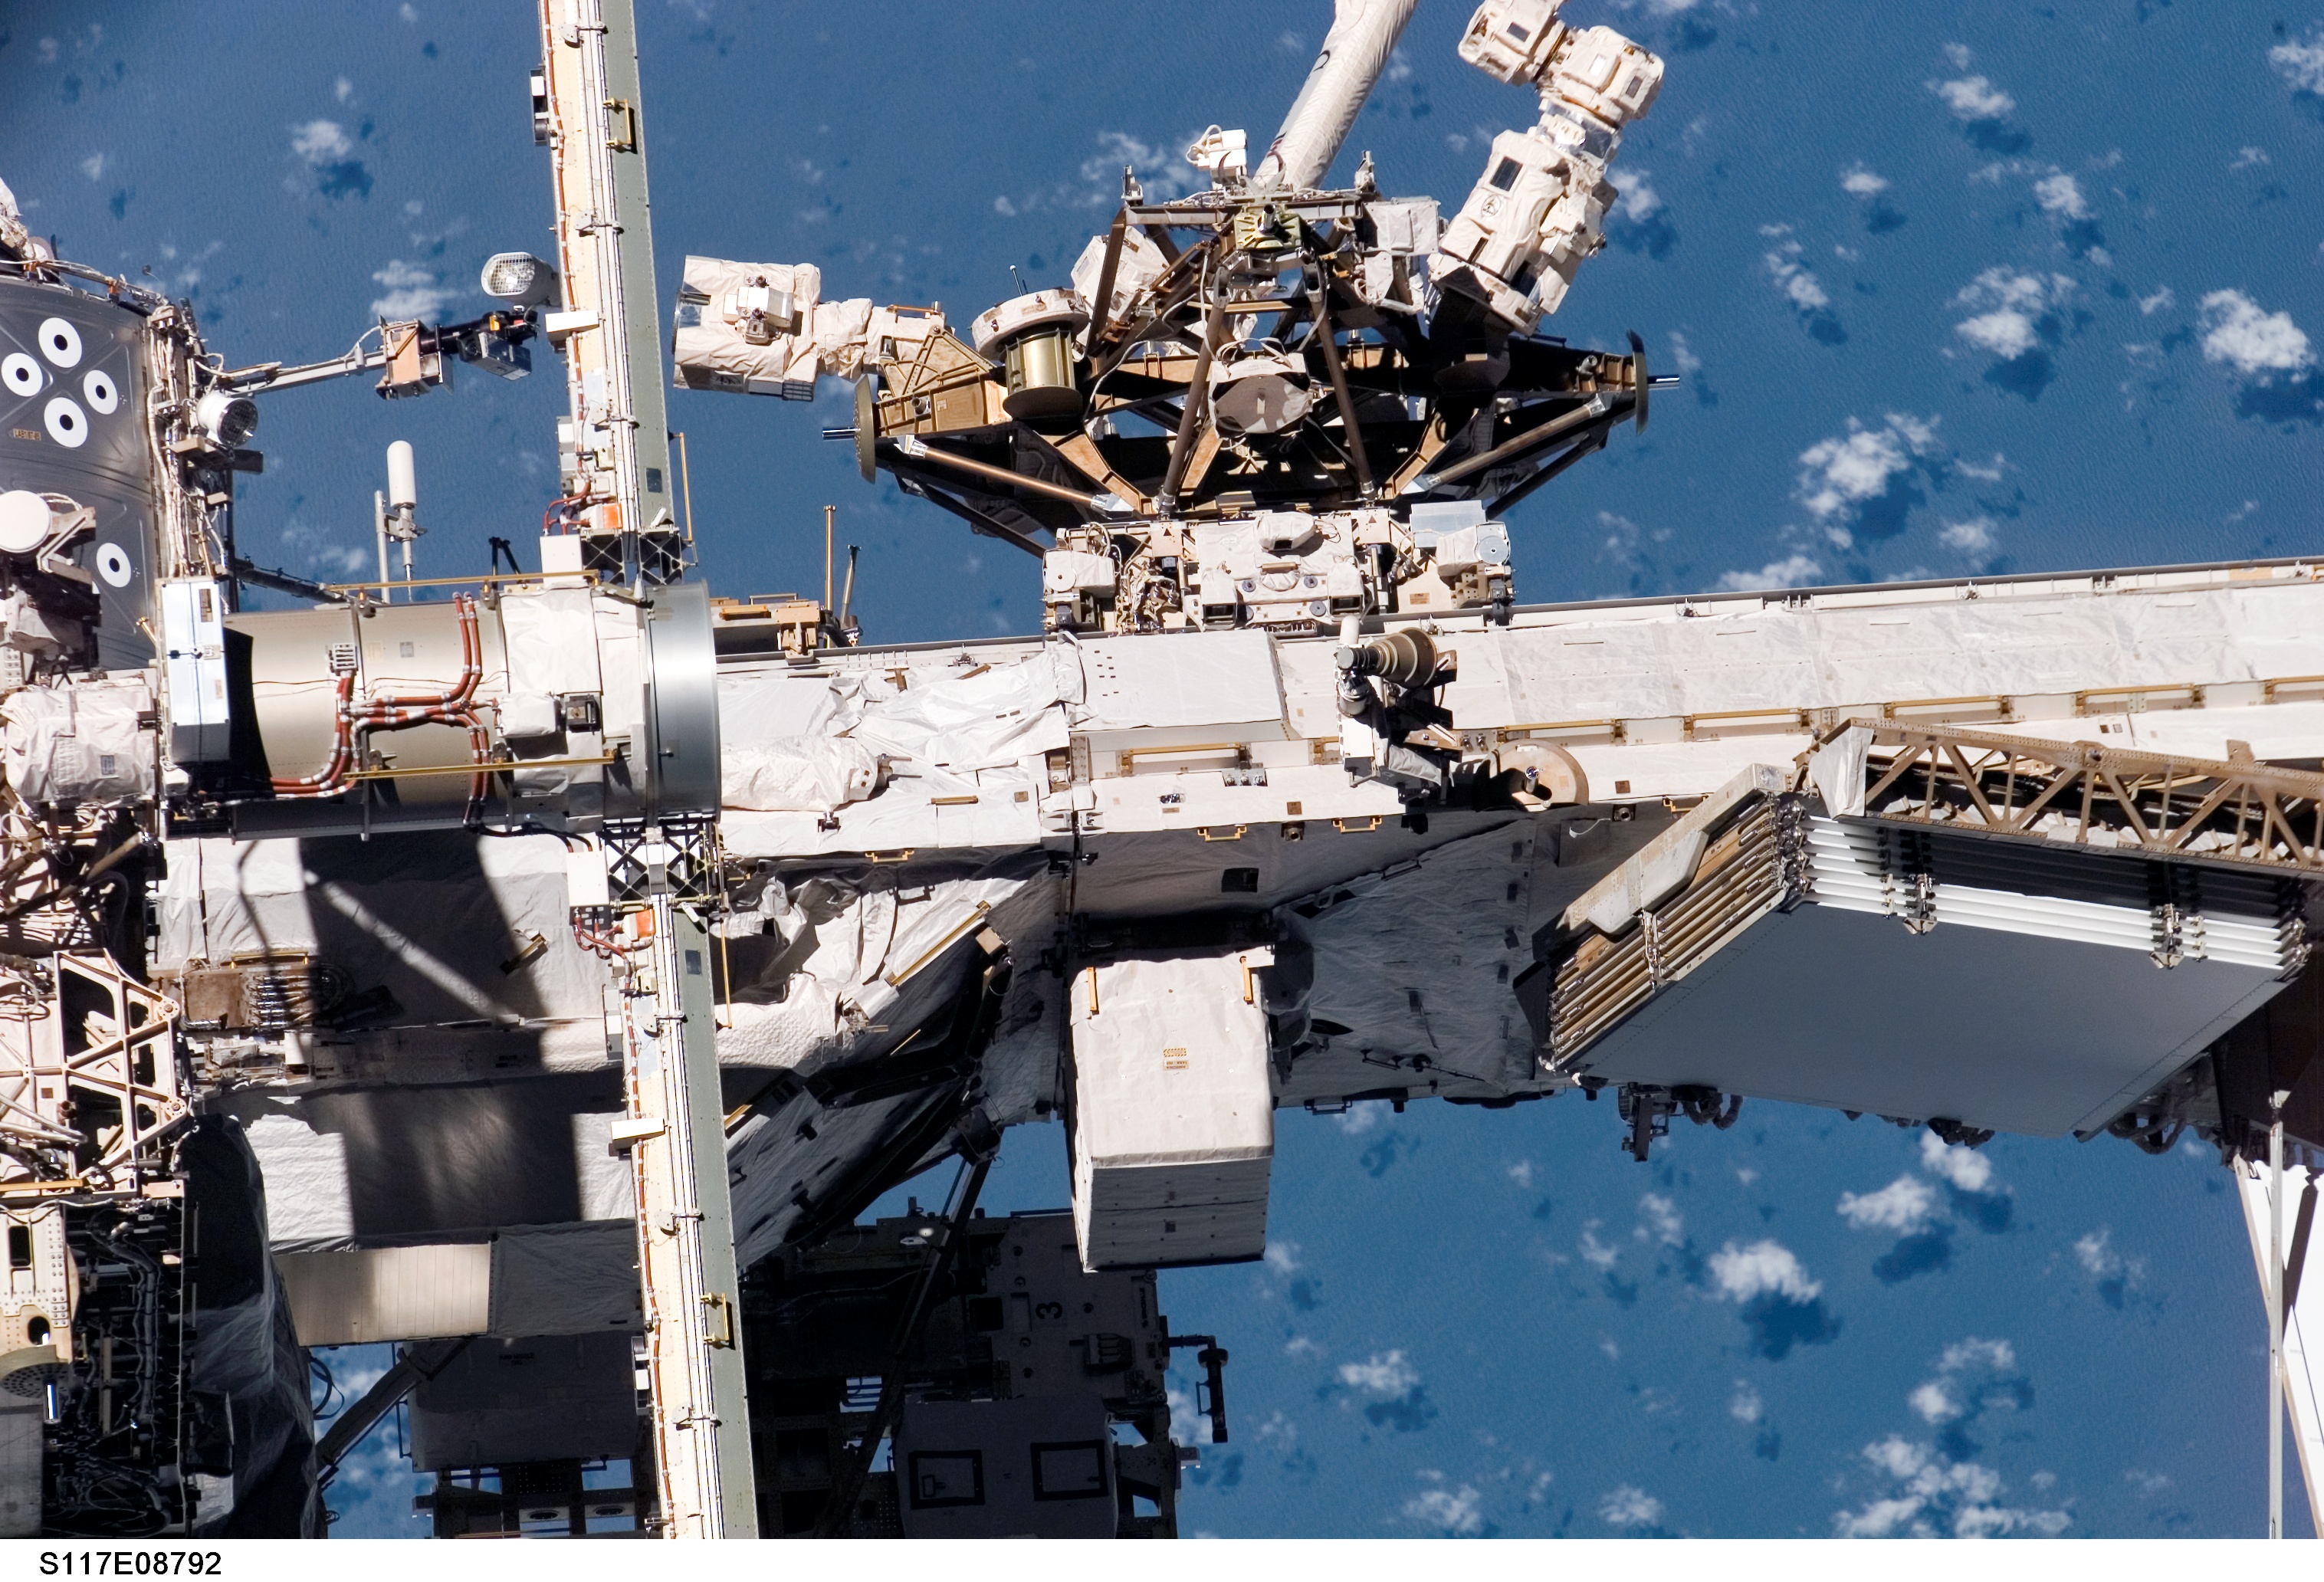 The Mobile Base System (MBS) is a work platform that moves on the Mobile Transporter rail car along rails on the International Space Station's integrated truss system.